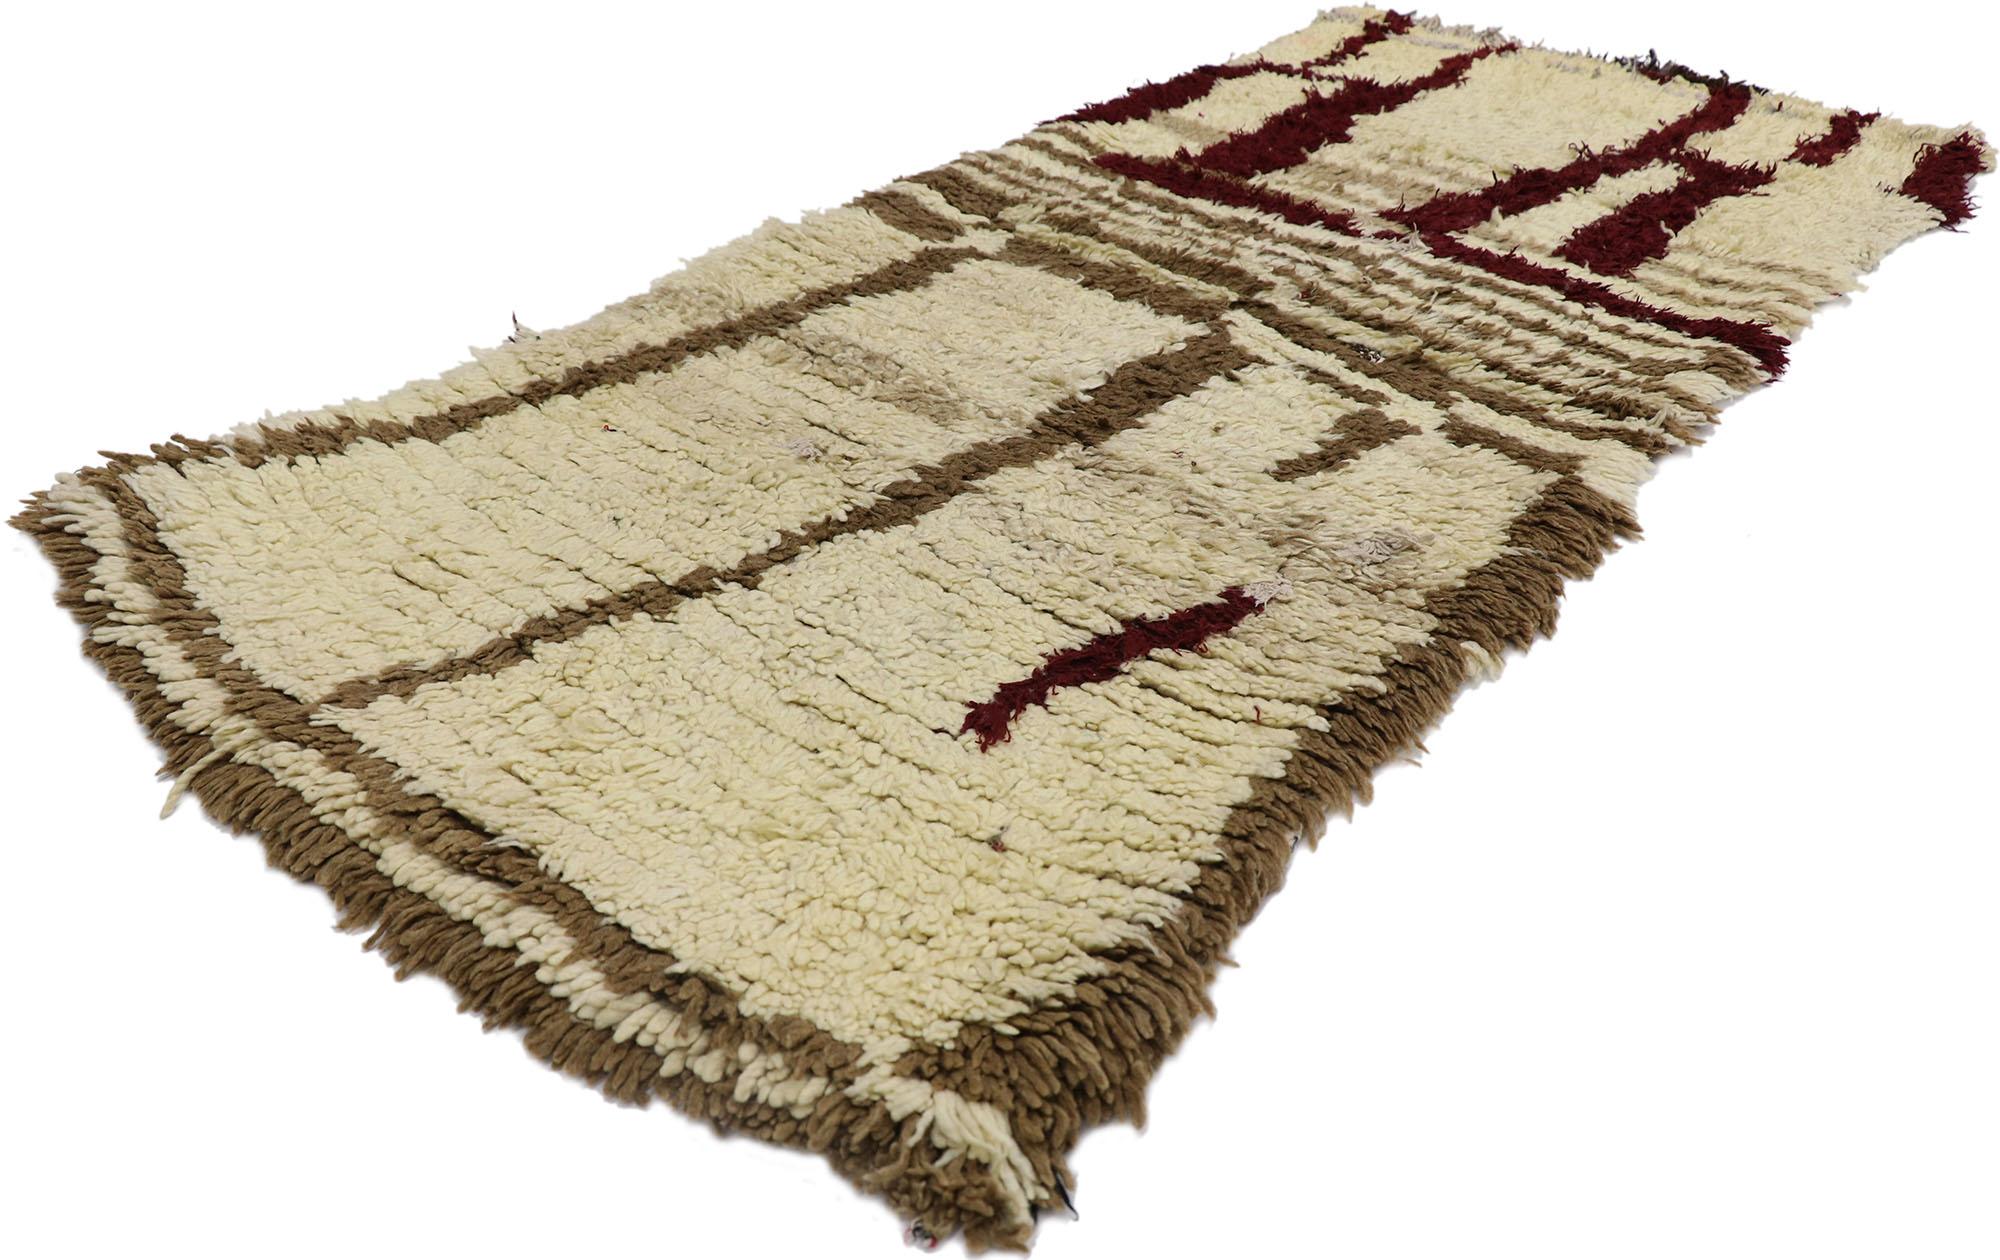 21598 Vintage Berber Moroccan Azilal rug with Mid-Century Modern Style 02'05 x 05'06. With its simplicity, plush pile and Mid-Century Modern style, this hand knotted cotton and wool vintage Berber Moroccan Azilal rug is a captivating vision of woven